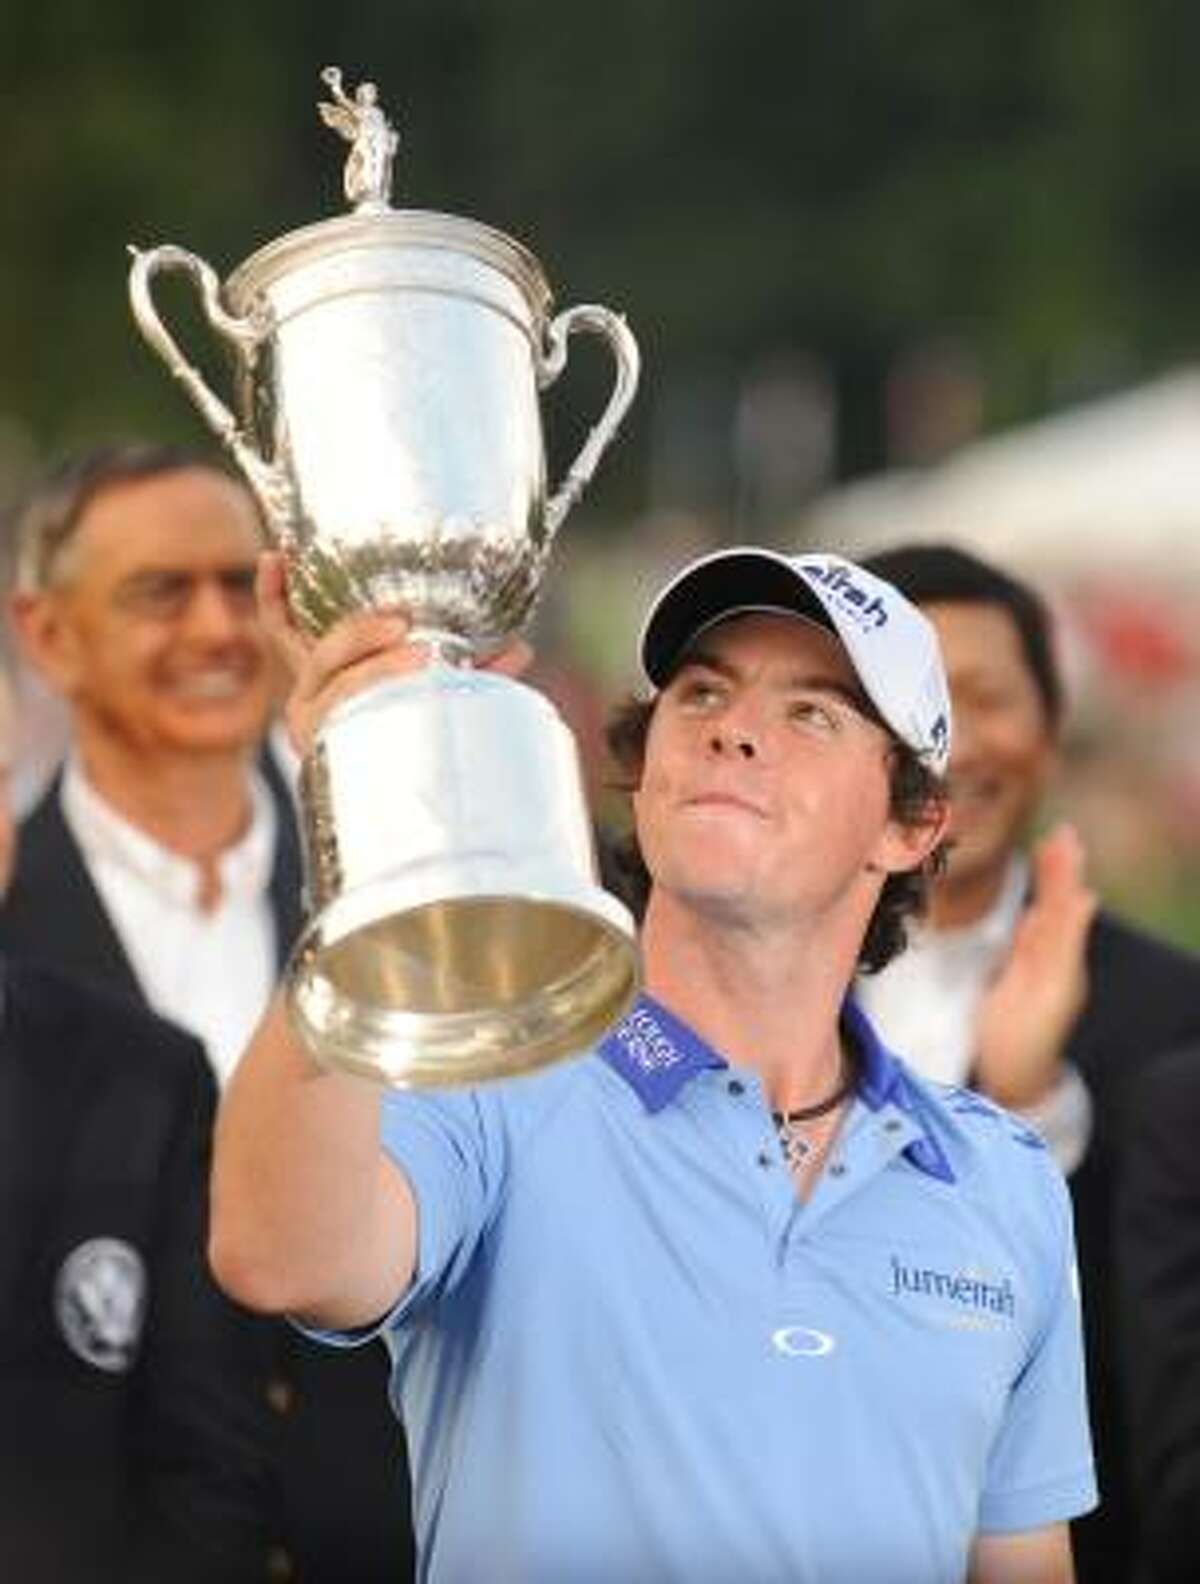 22yearold McIlroy claims first major with U.S. Open win